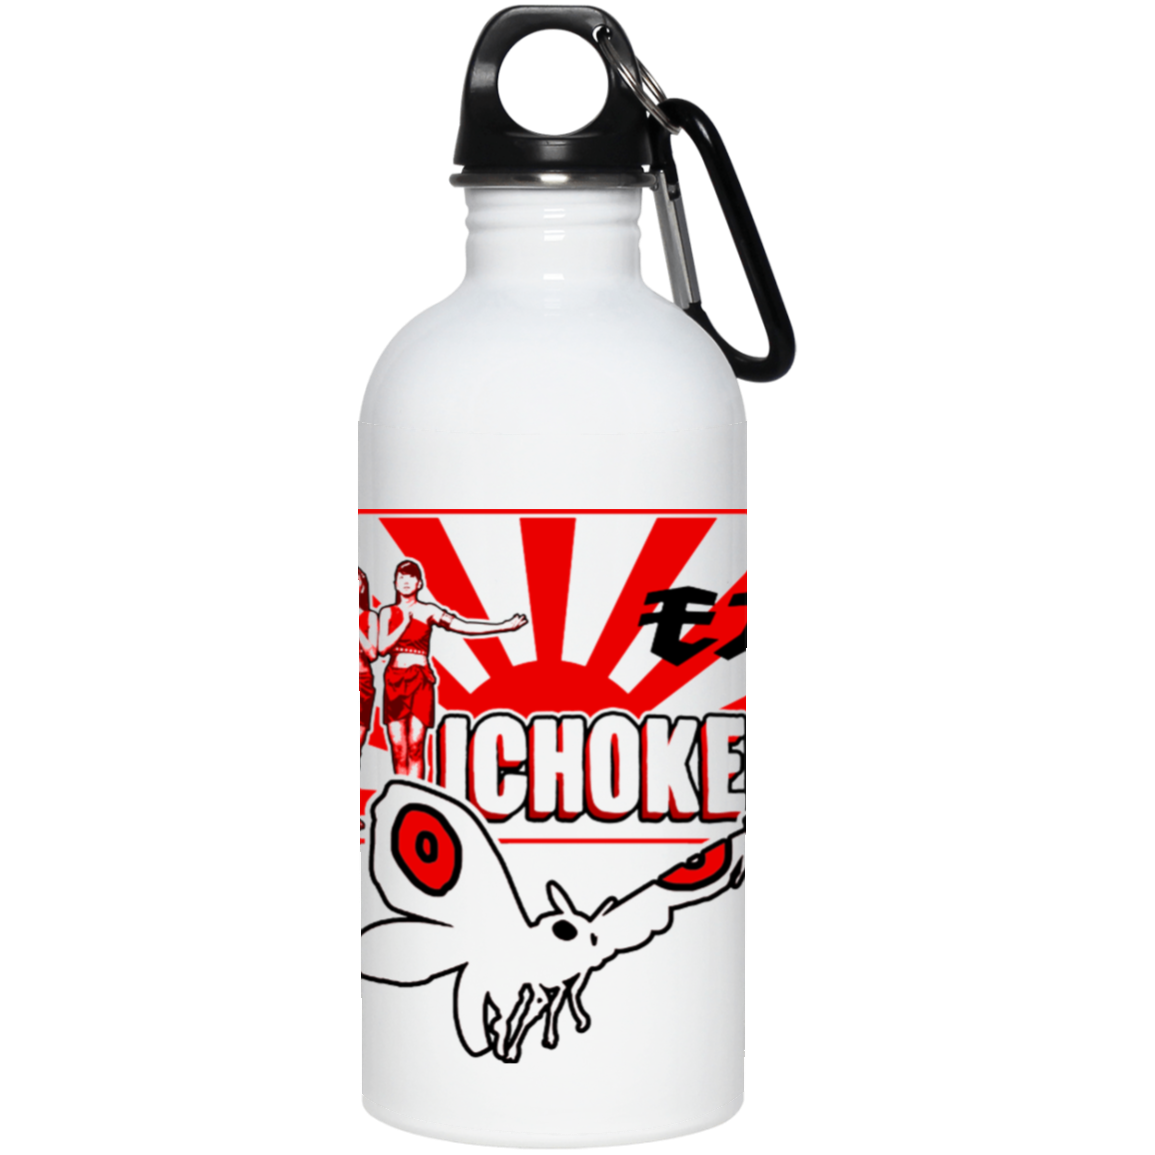 ArtichokeUSA Character and Font design. Shobijin (Twins)/Mothra Fan Art . Let's Create Your Own Design Today. 20 oz. Stainless Steel Water Bottle